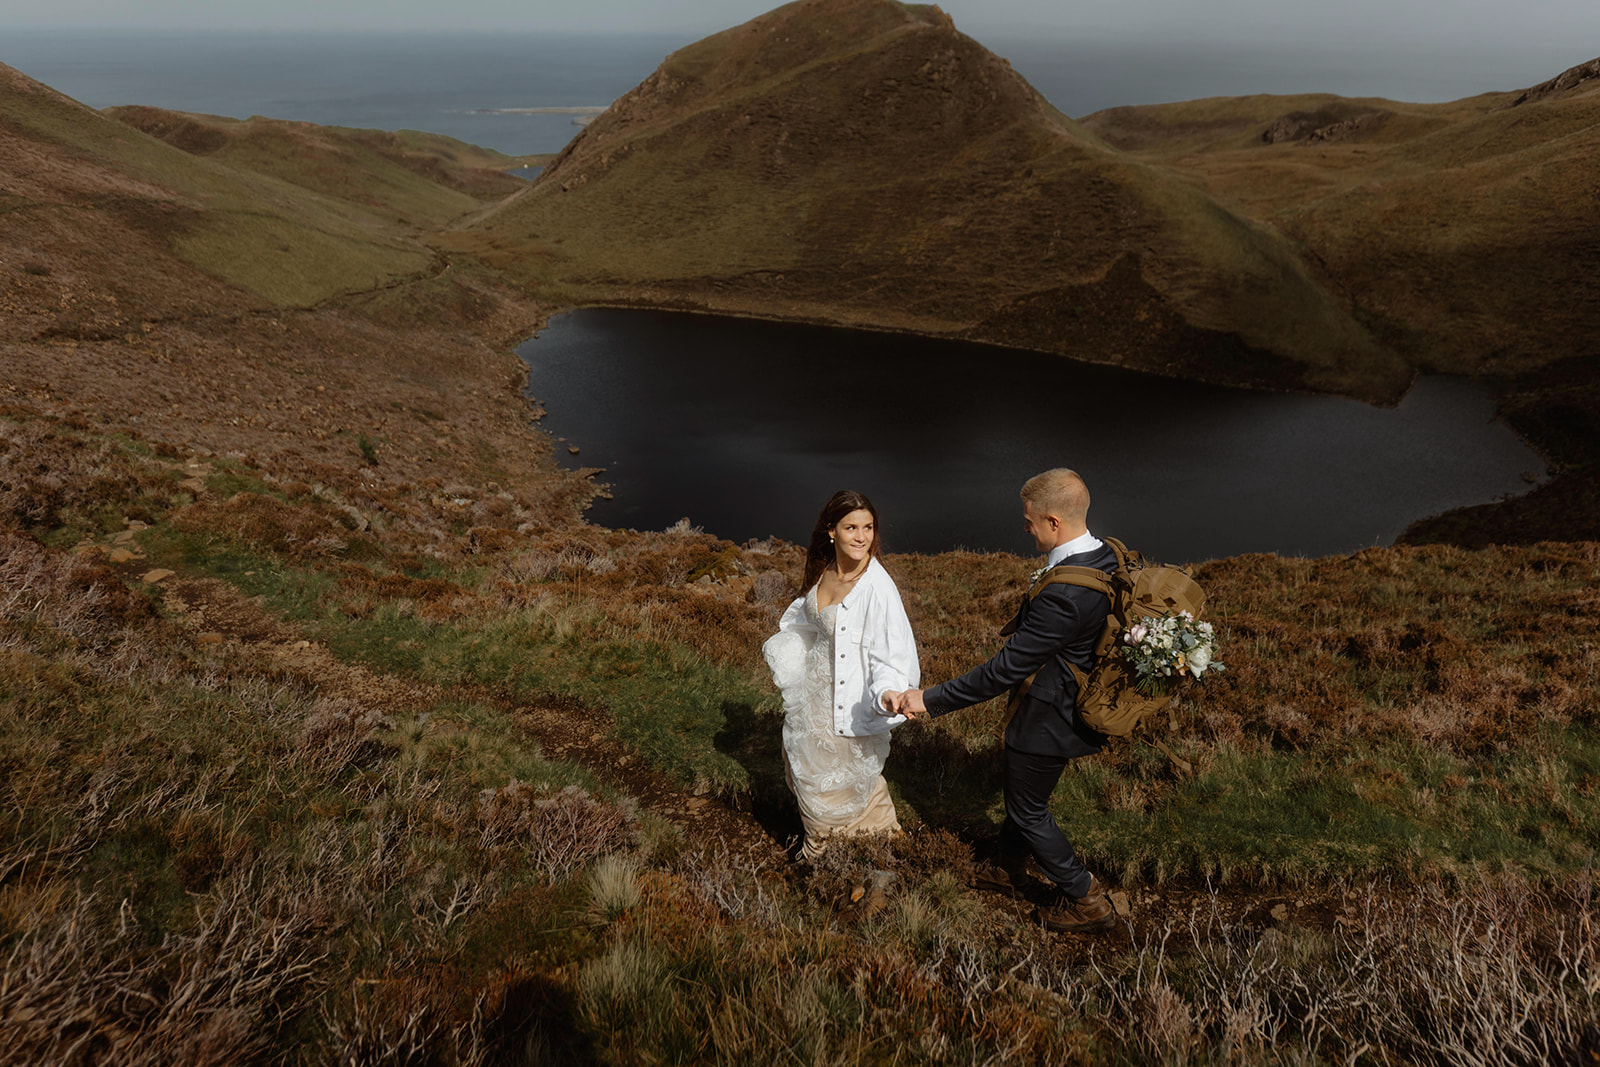 Emma and Matthew shared an intimate moment as they hike down after their Isle of Skye elopement ceremony